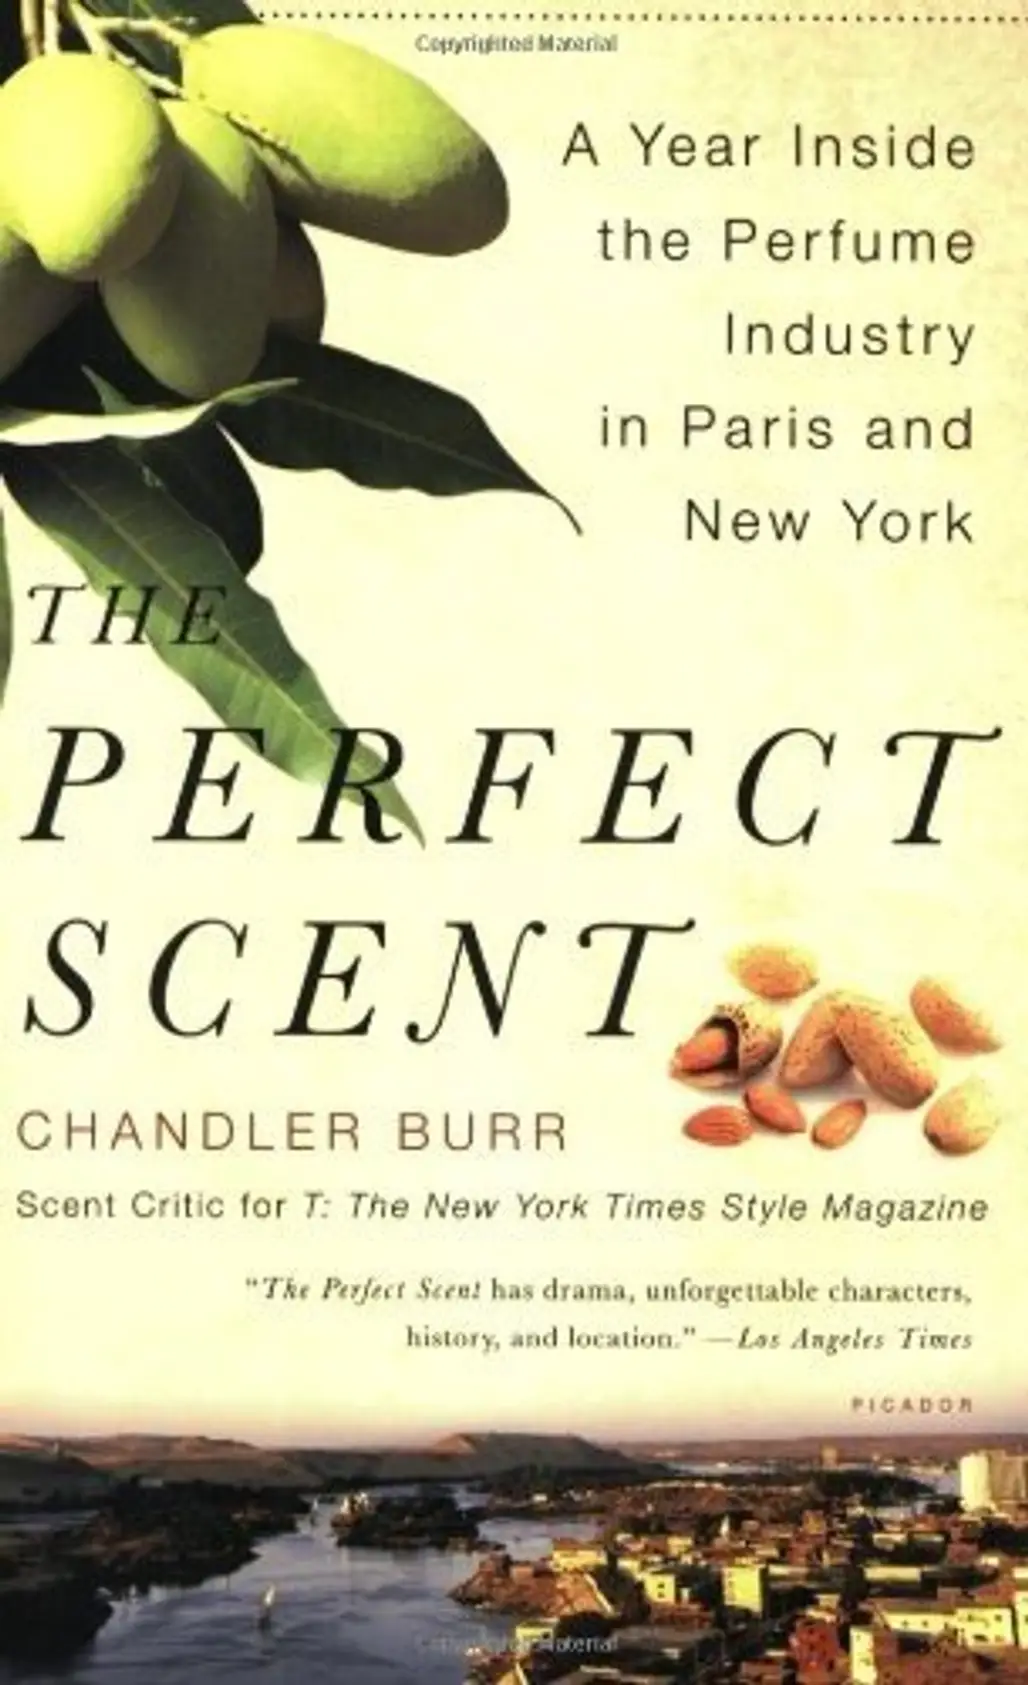 The Perfect Scent: a Year inside the Perfume Industry in Paris & New York – Chandler Burr